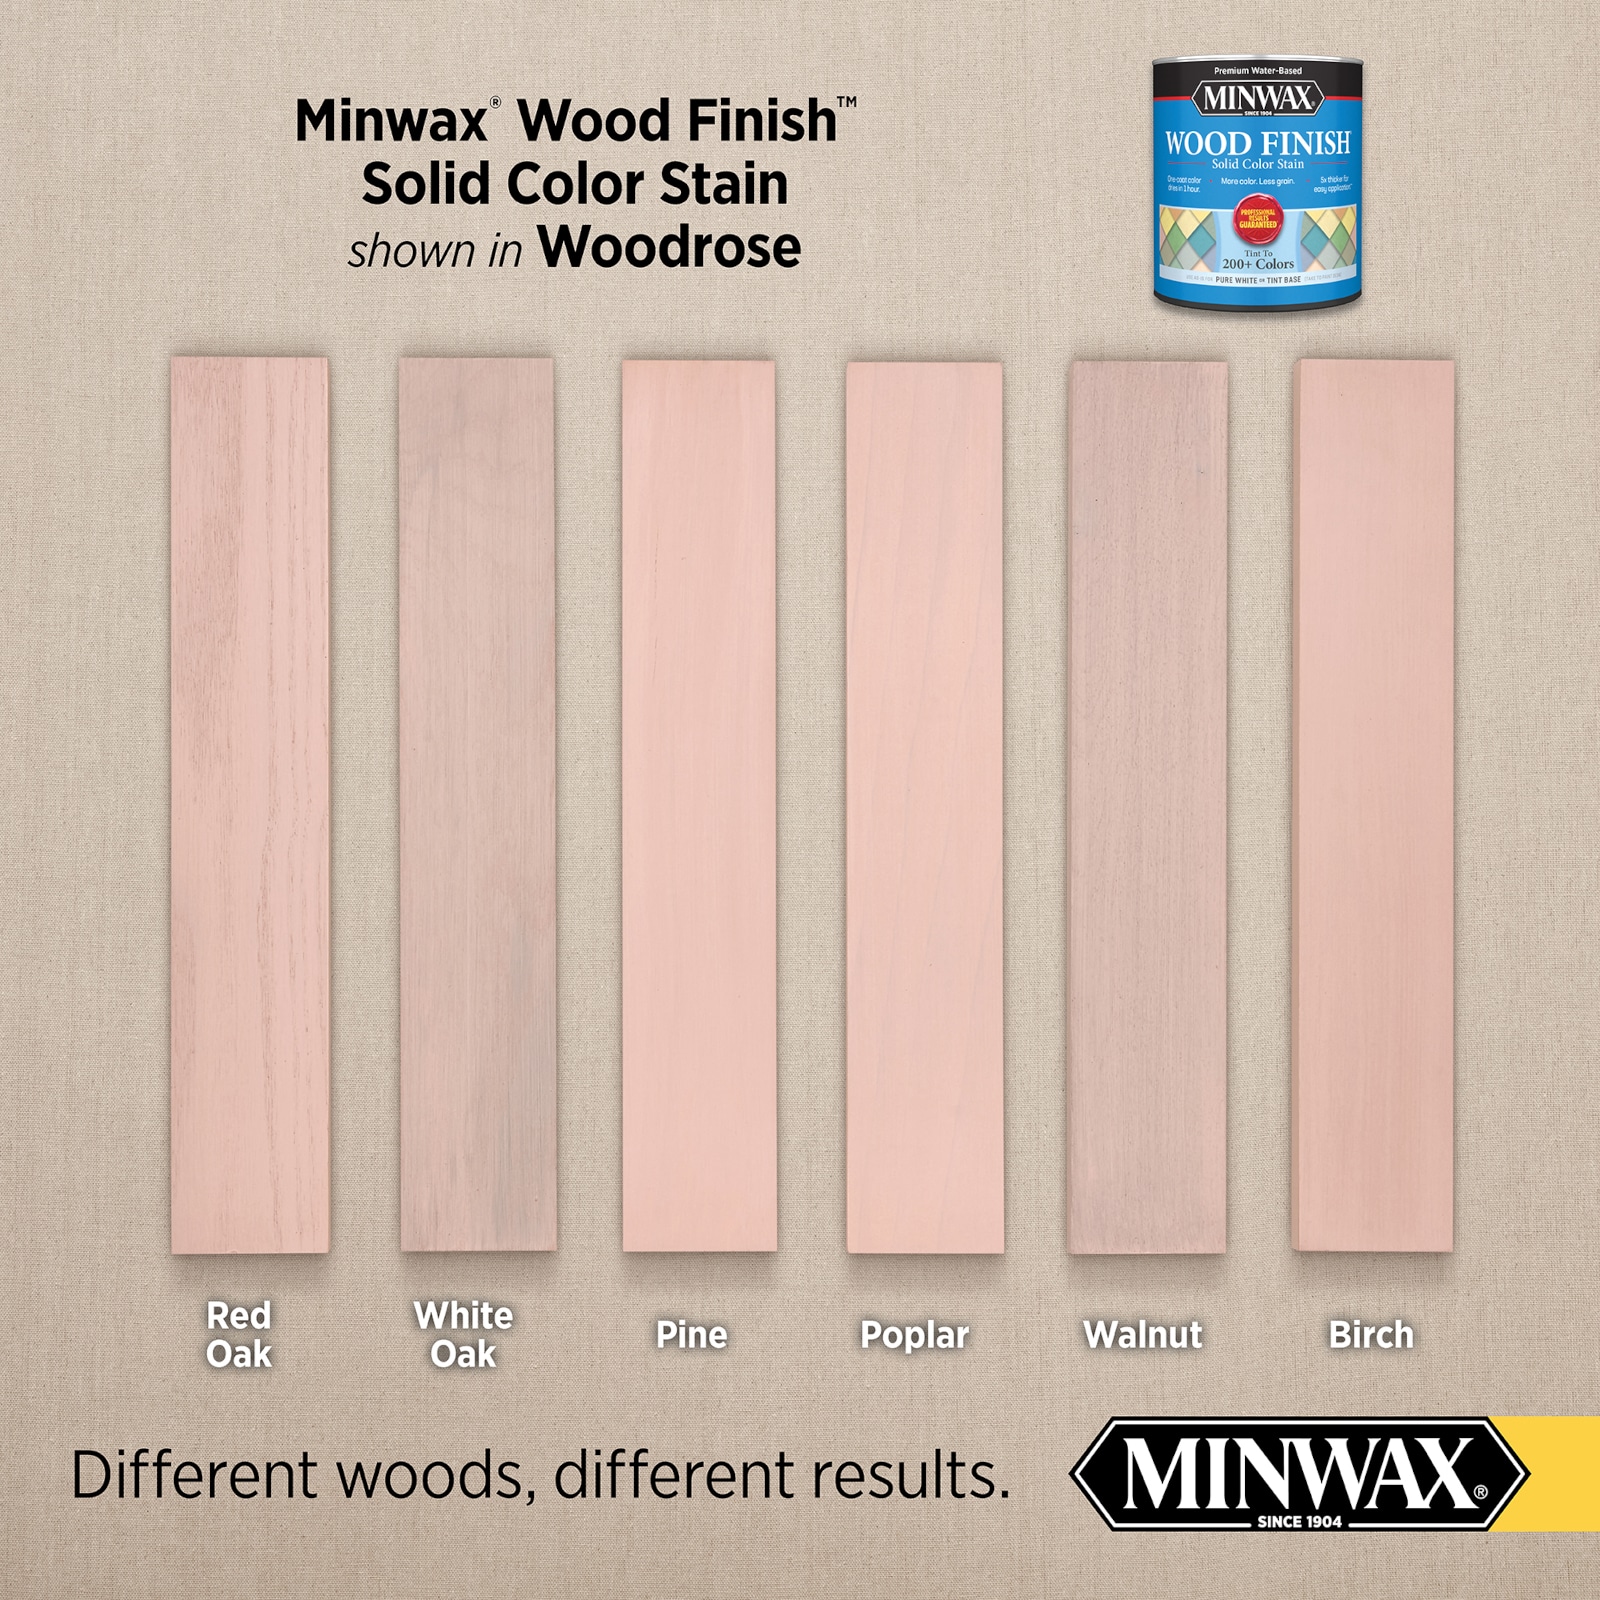 Minwax Wood Finish Water-Based Barn Red Mw287 Solid Interior Stain